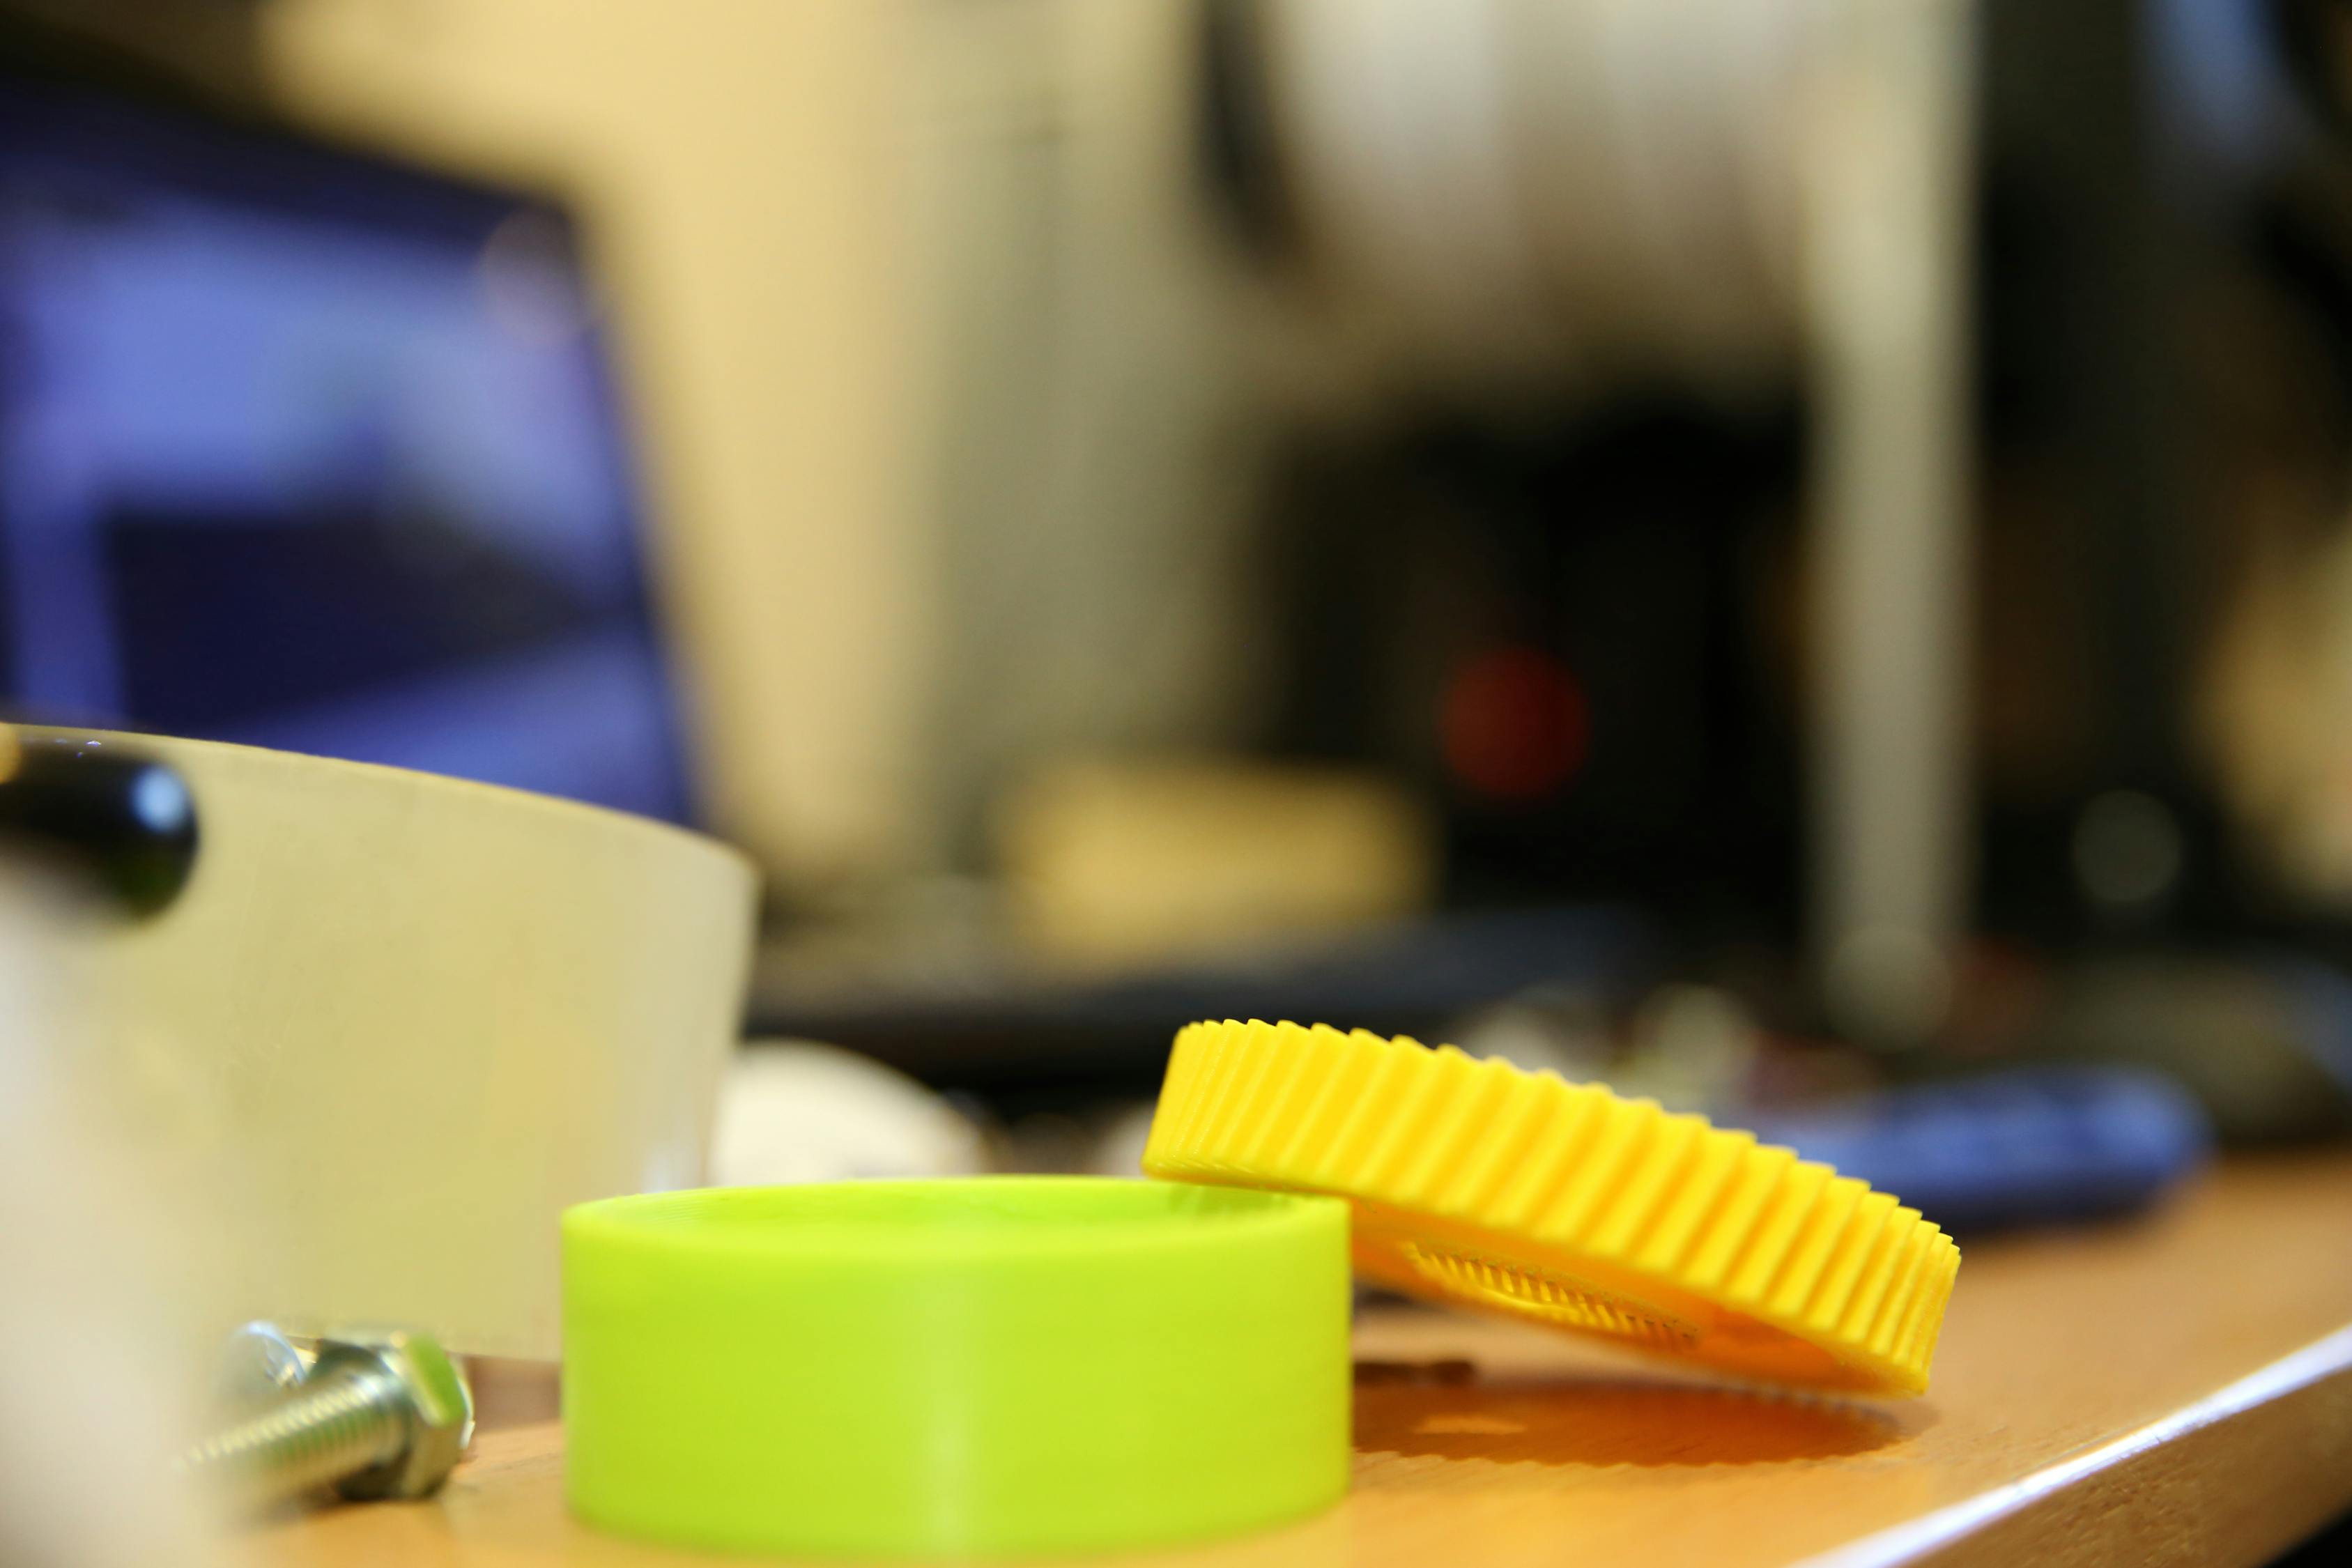 free-stock-photo-of-3d-print-3d-printed-objects-3d-printer